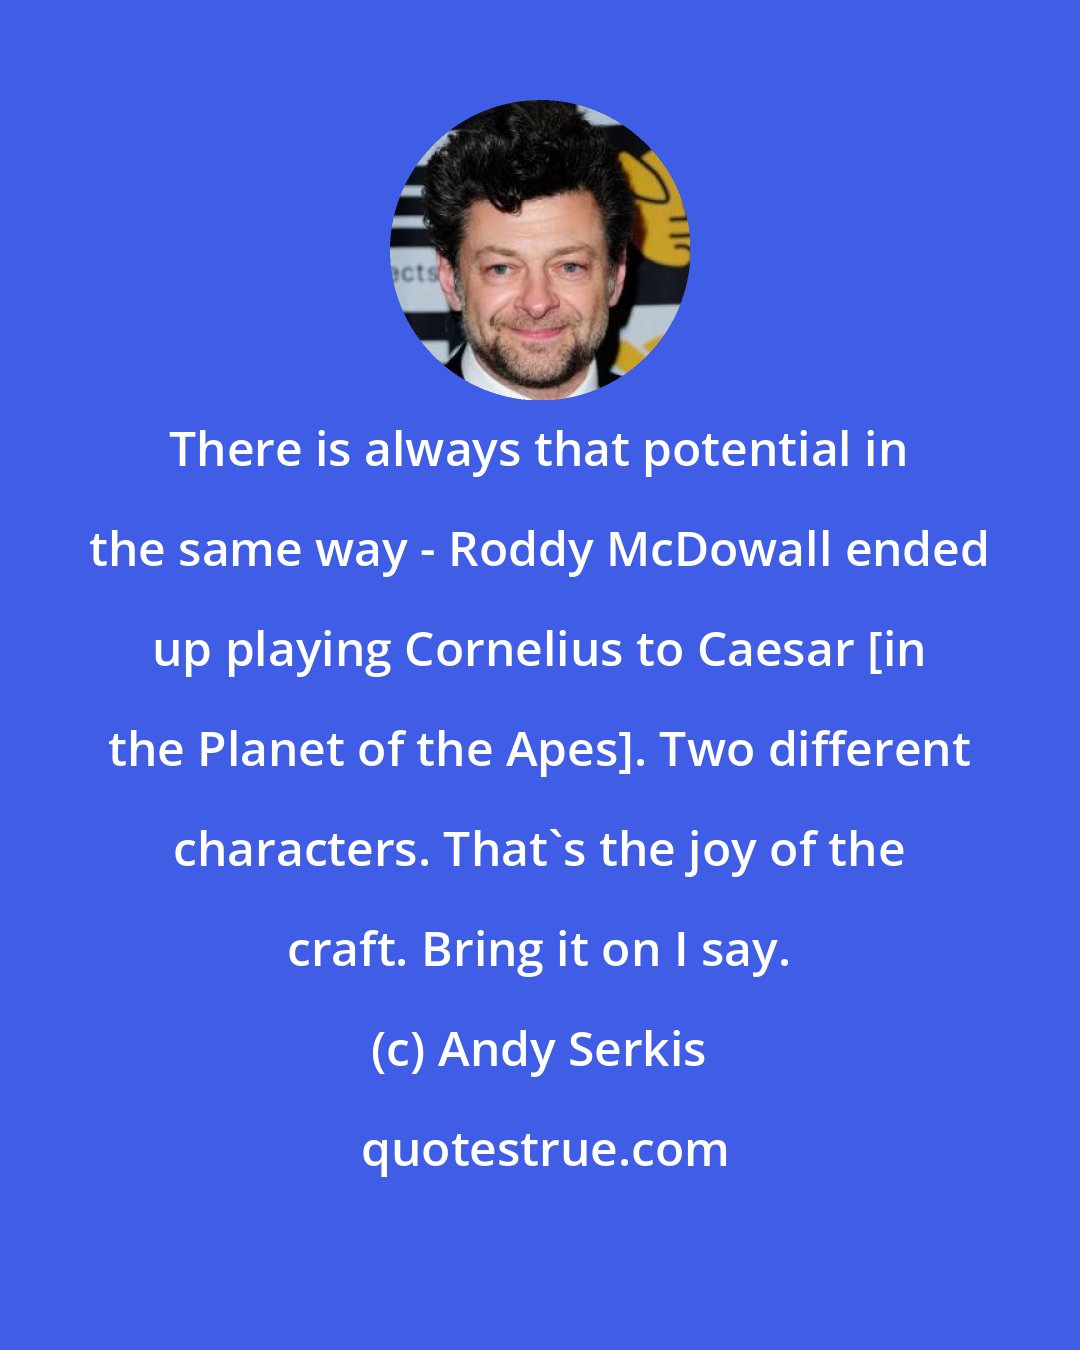 Andy Serkis: There is always that potential in the same way - Roddy McDowall ended up playing Cornelius to Caesar [in the Planet of the Apes]. Two different characters. That's the joy of the craft. Bring it on I say.